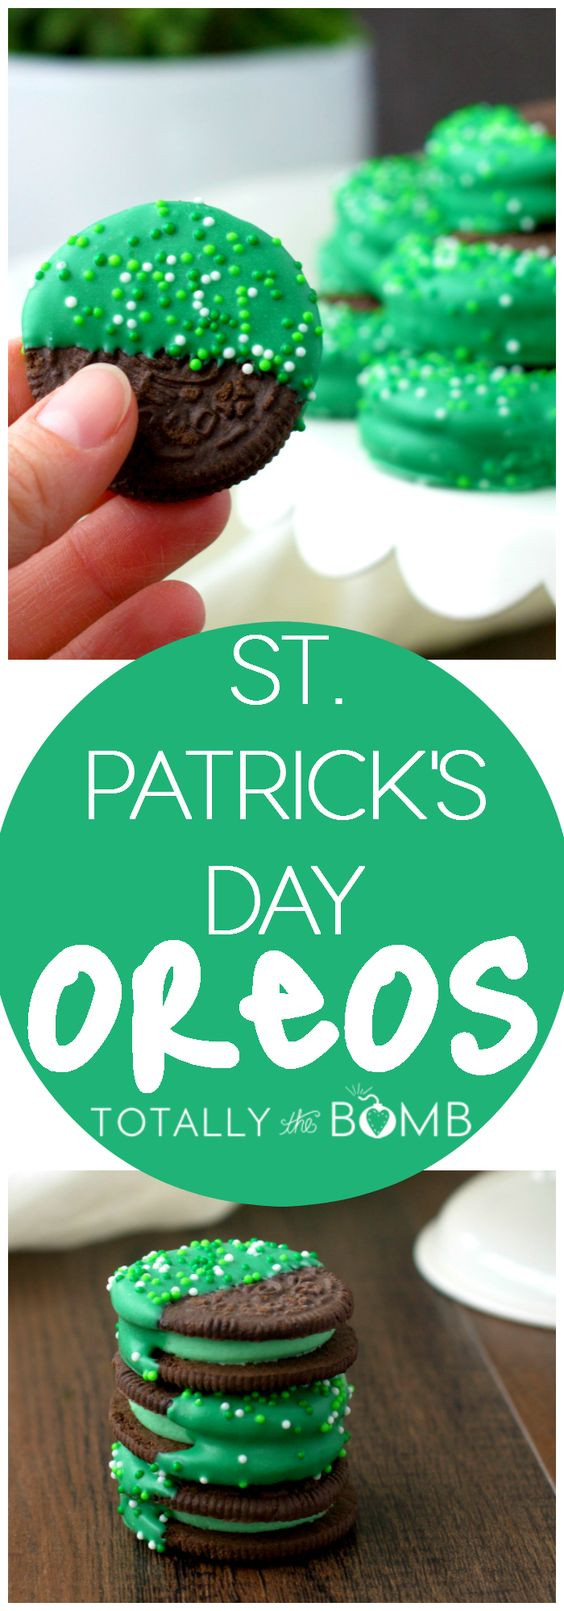 Traditional St. Patrick's Day Food
 14 Popular Easy St Patrick’s Day Desserts and Treats